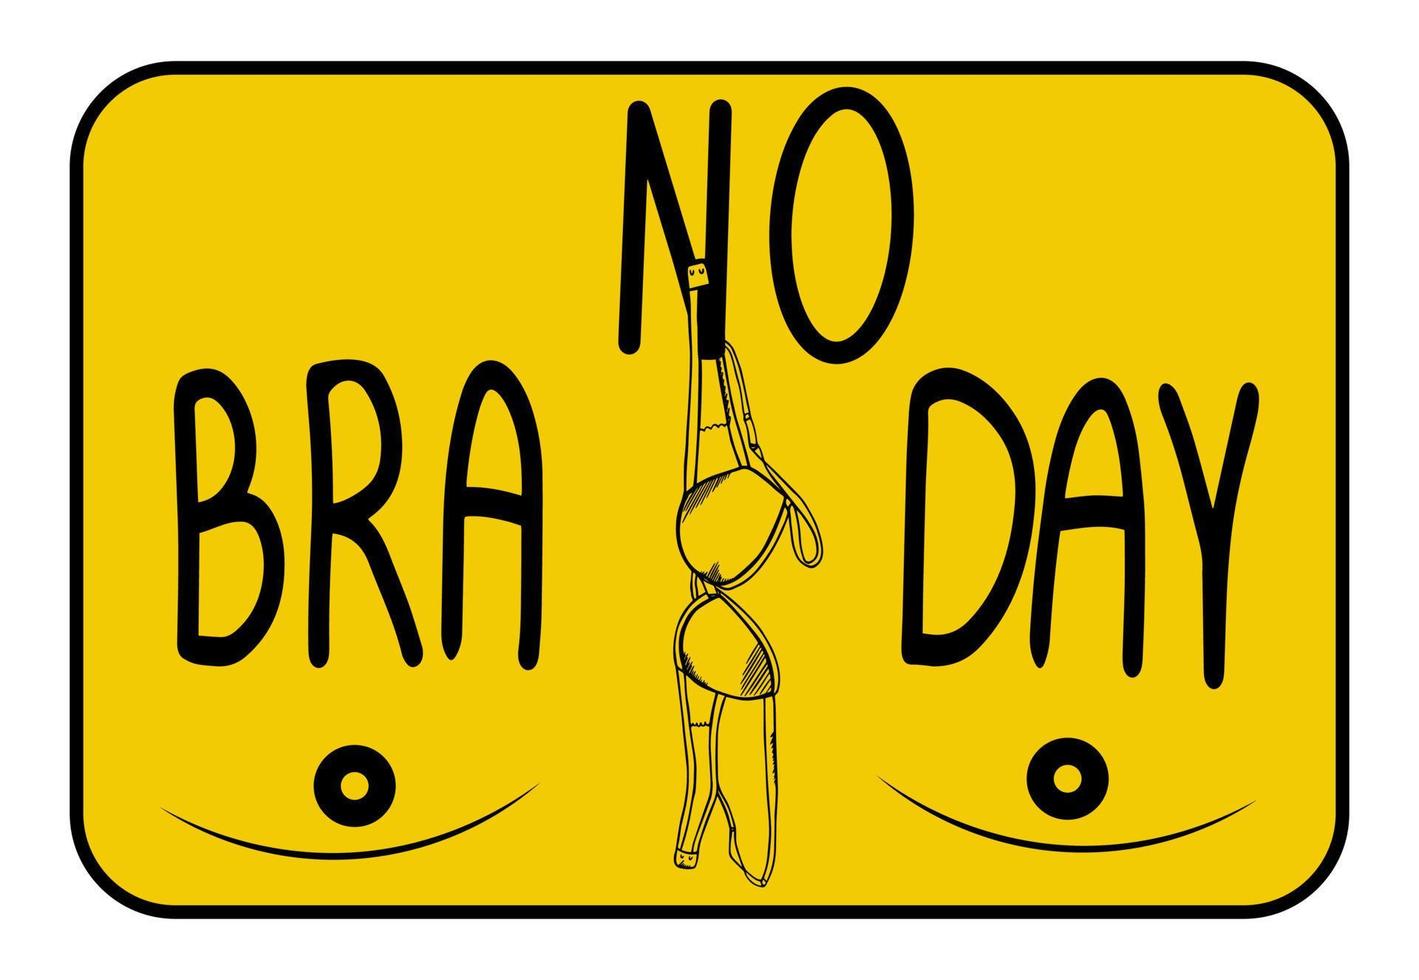 Handwritten lettering poster - No bra today - on a green